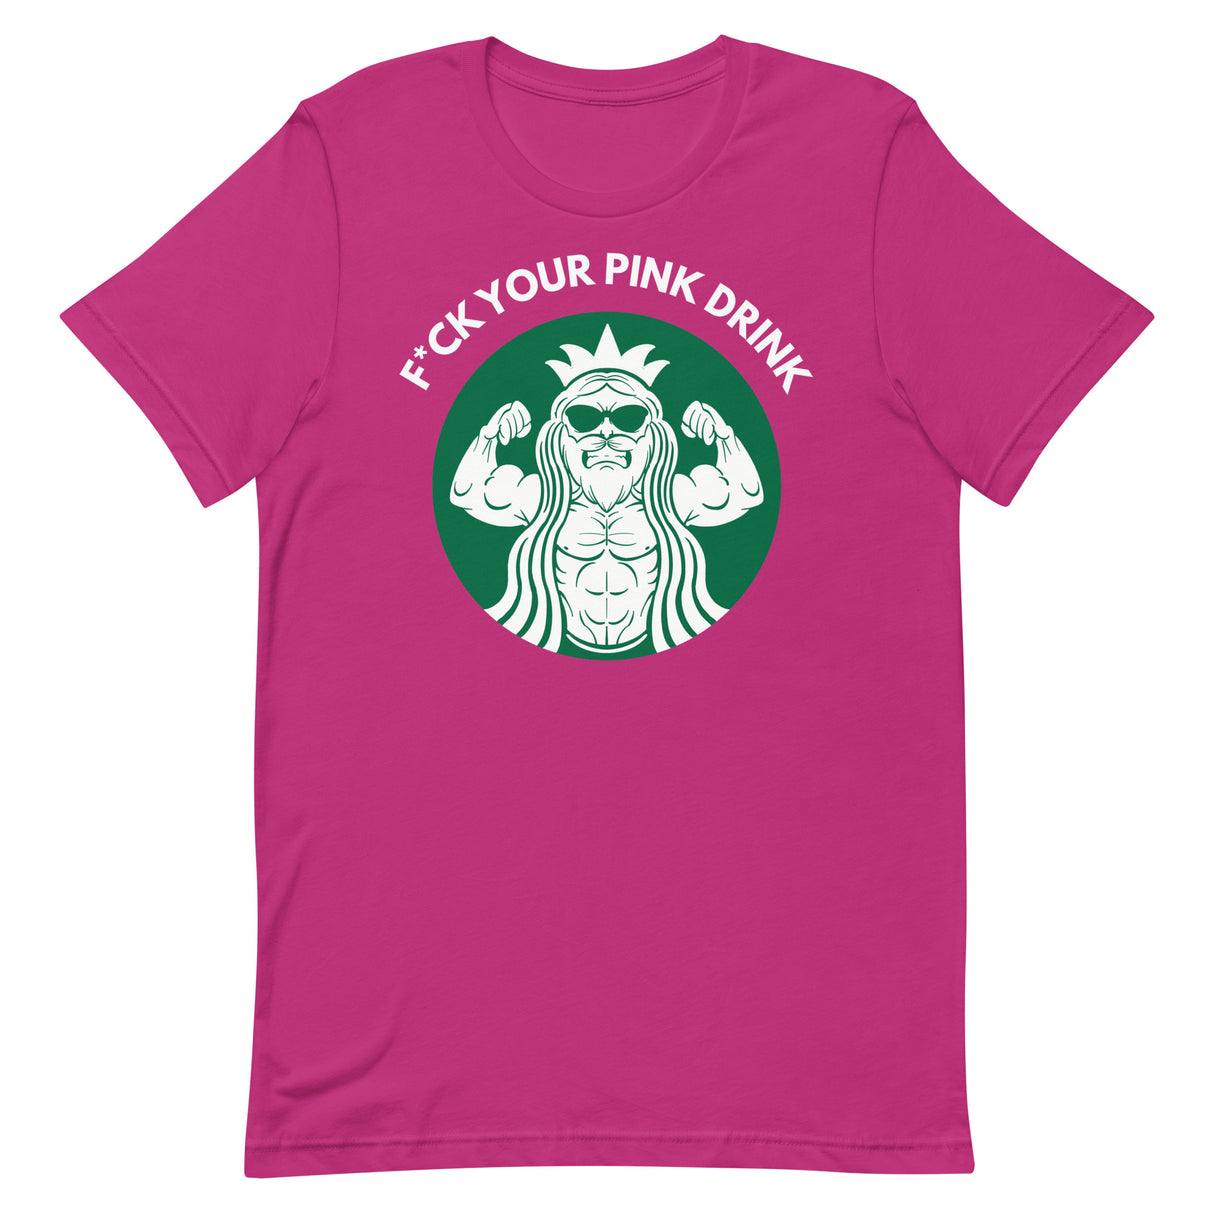 F*ck Your Pink Drink T-Shirt